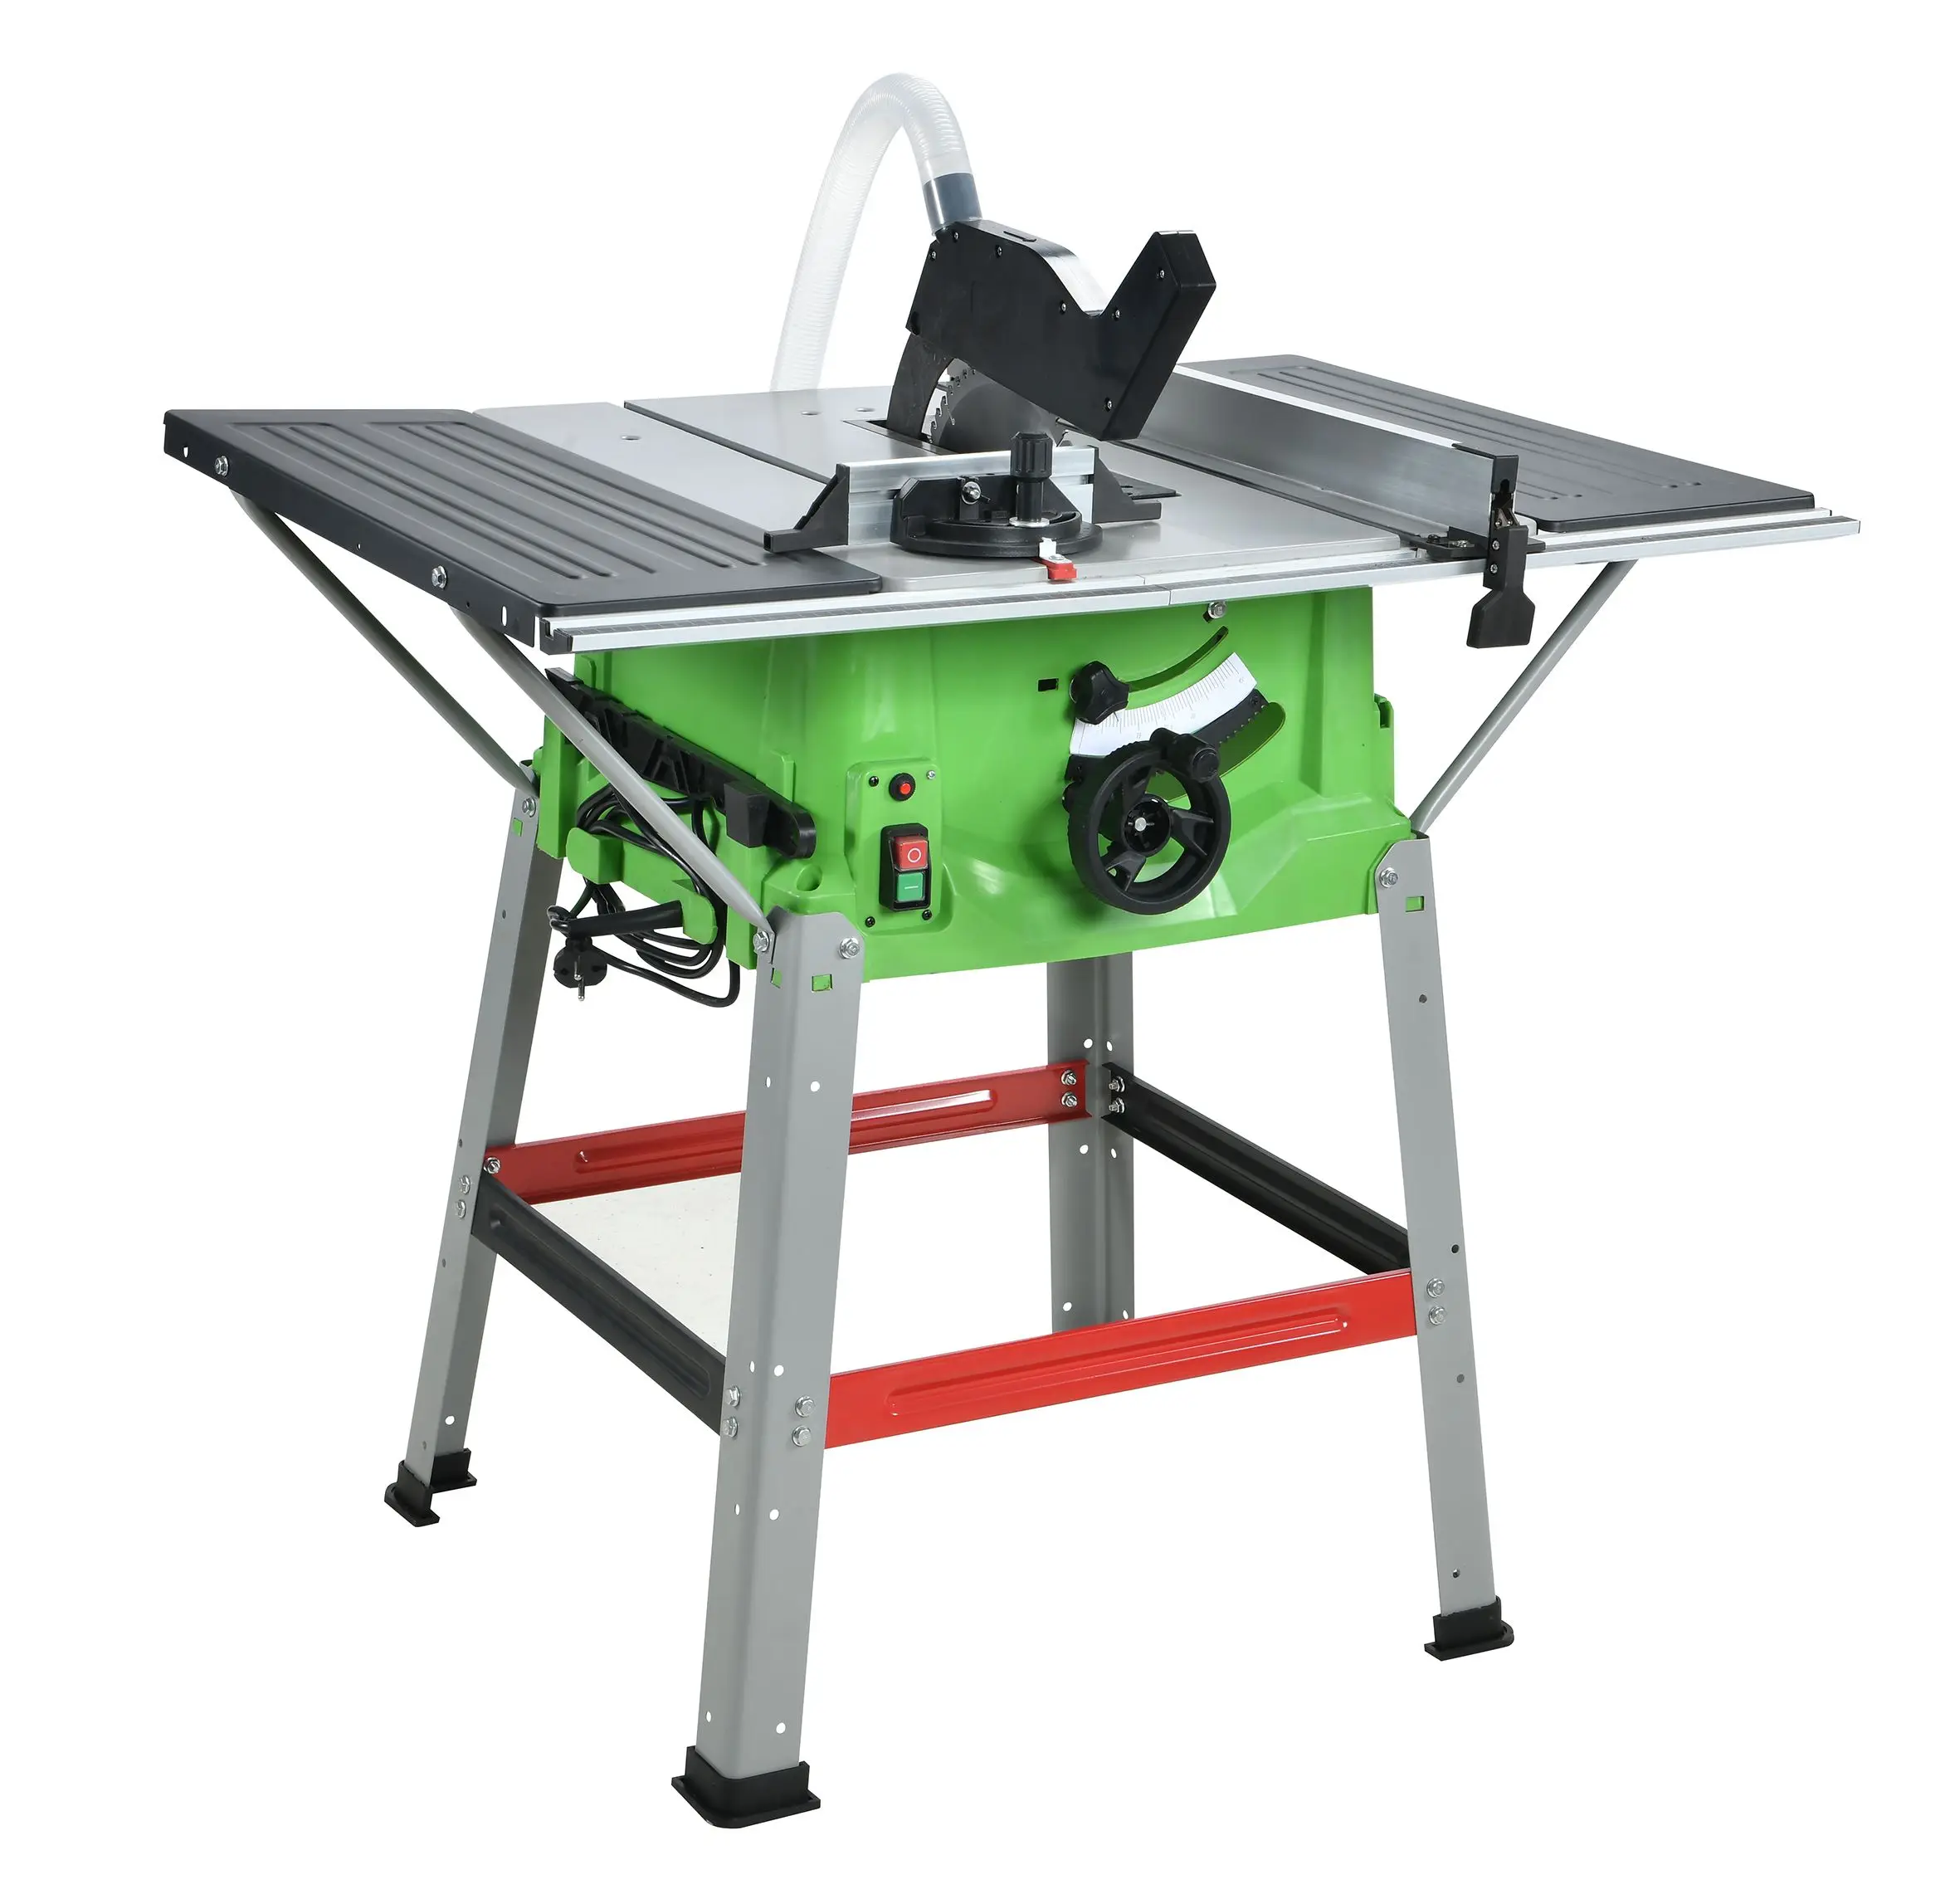 1800w 255mm Sawstop Portable Table Saw For Sale Table Saw Machine Wood Cutting Machine Sliding Table Saw Buy Wood Cutting Machine Sliding Table Saw